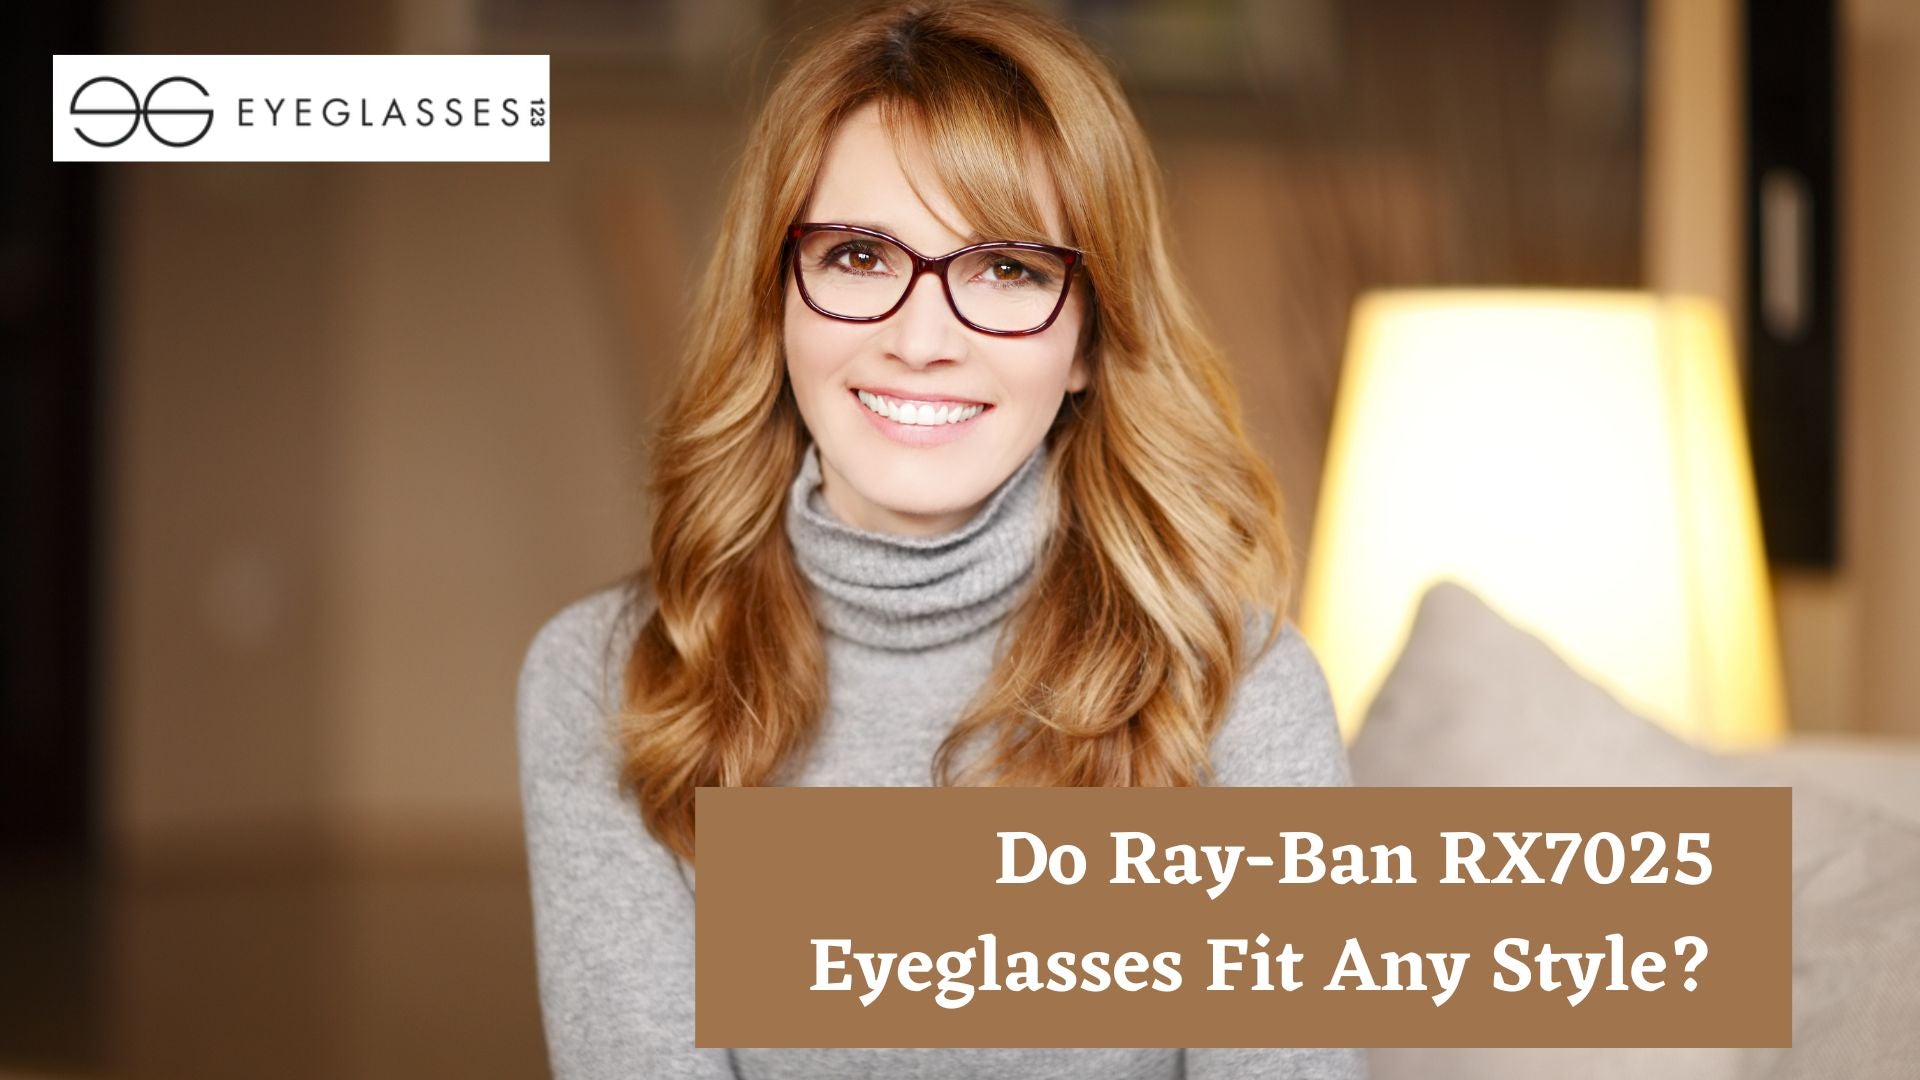 Do Ray-Ban RX7025 Eyeglasses Fit Any Style?